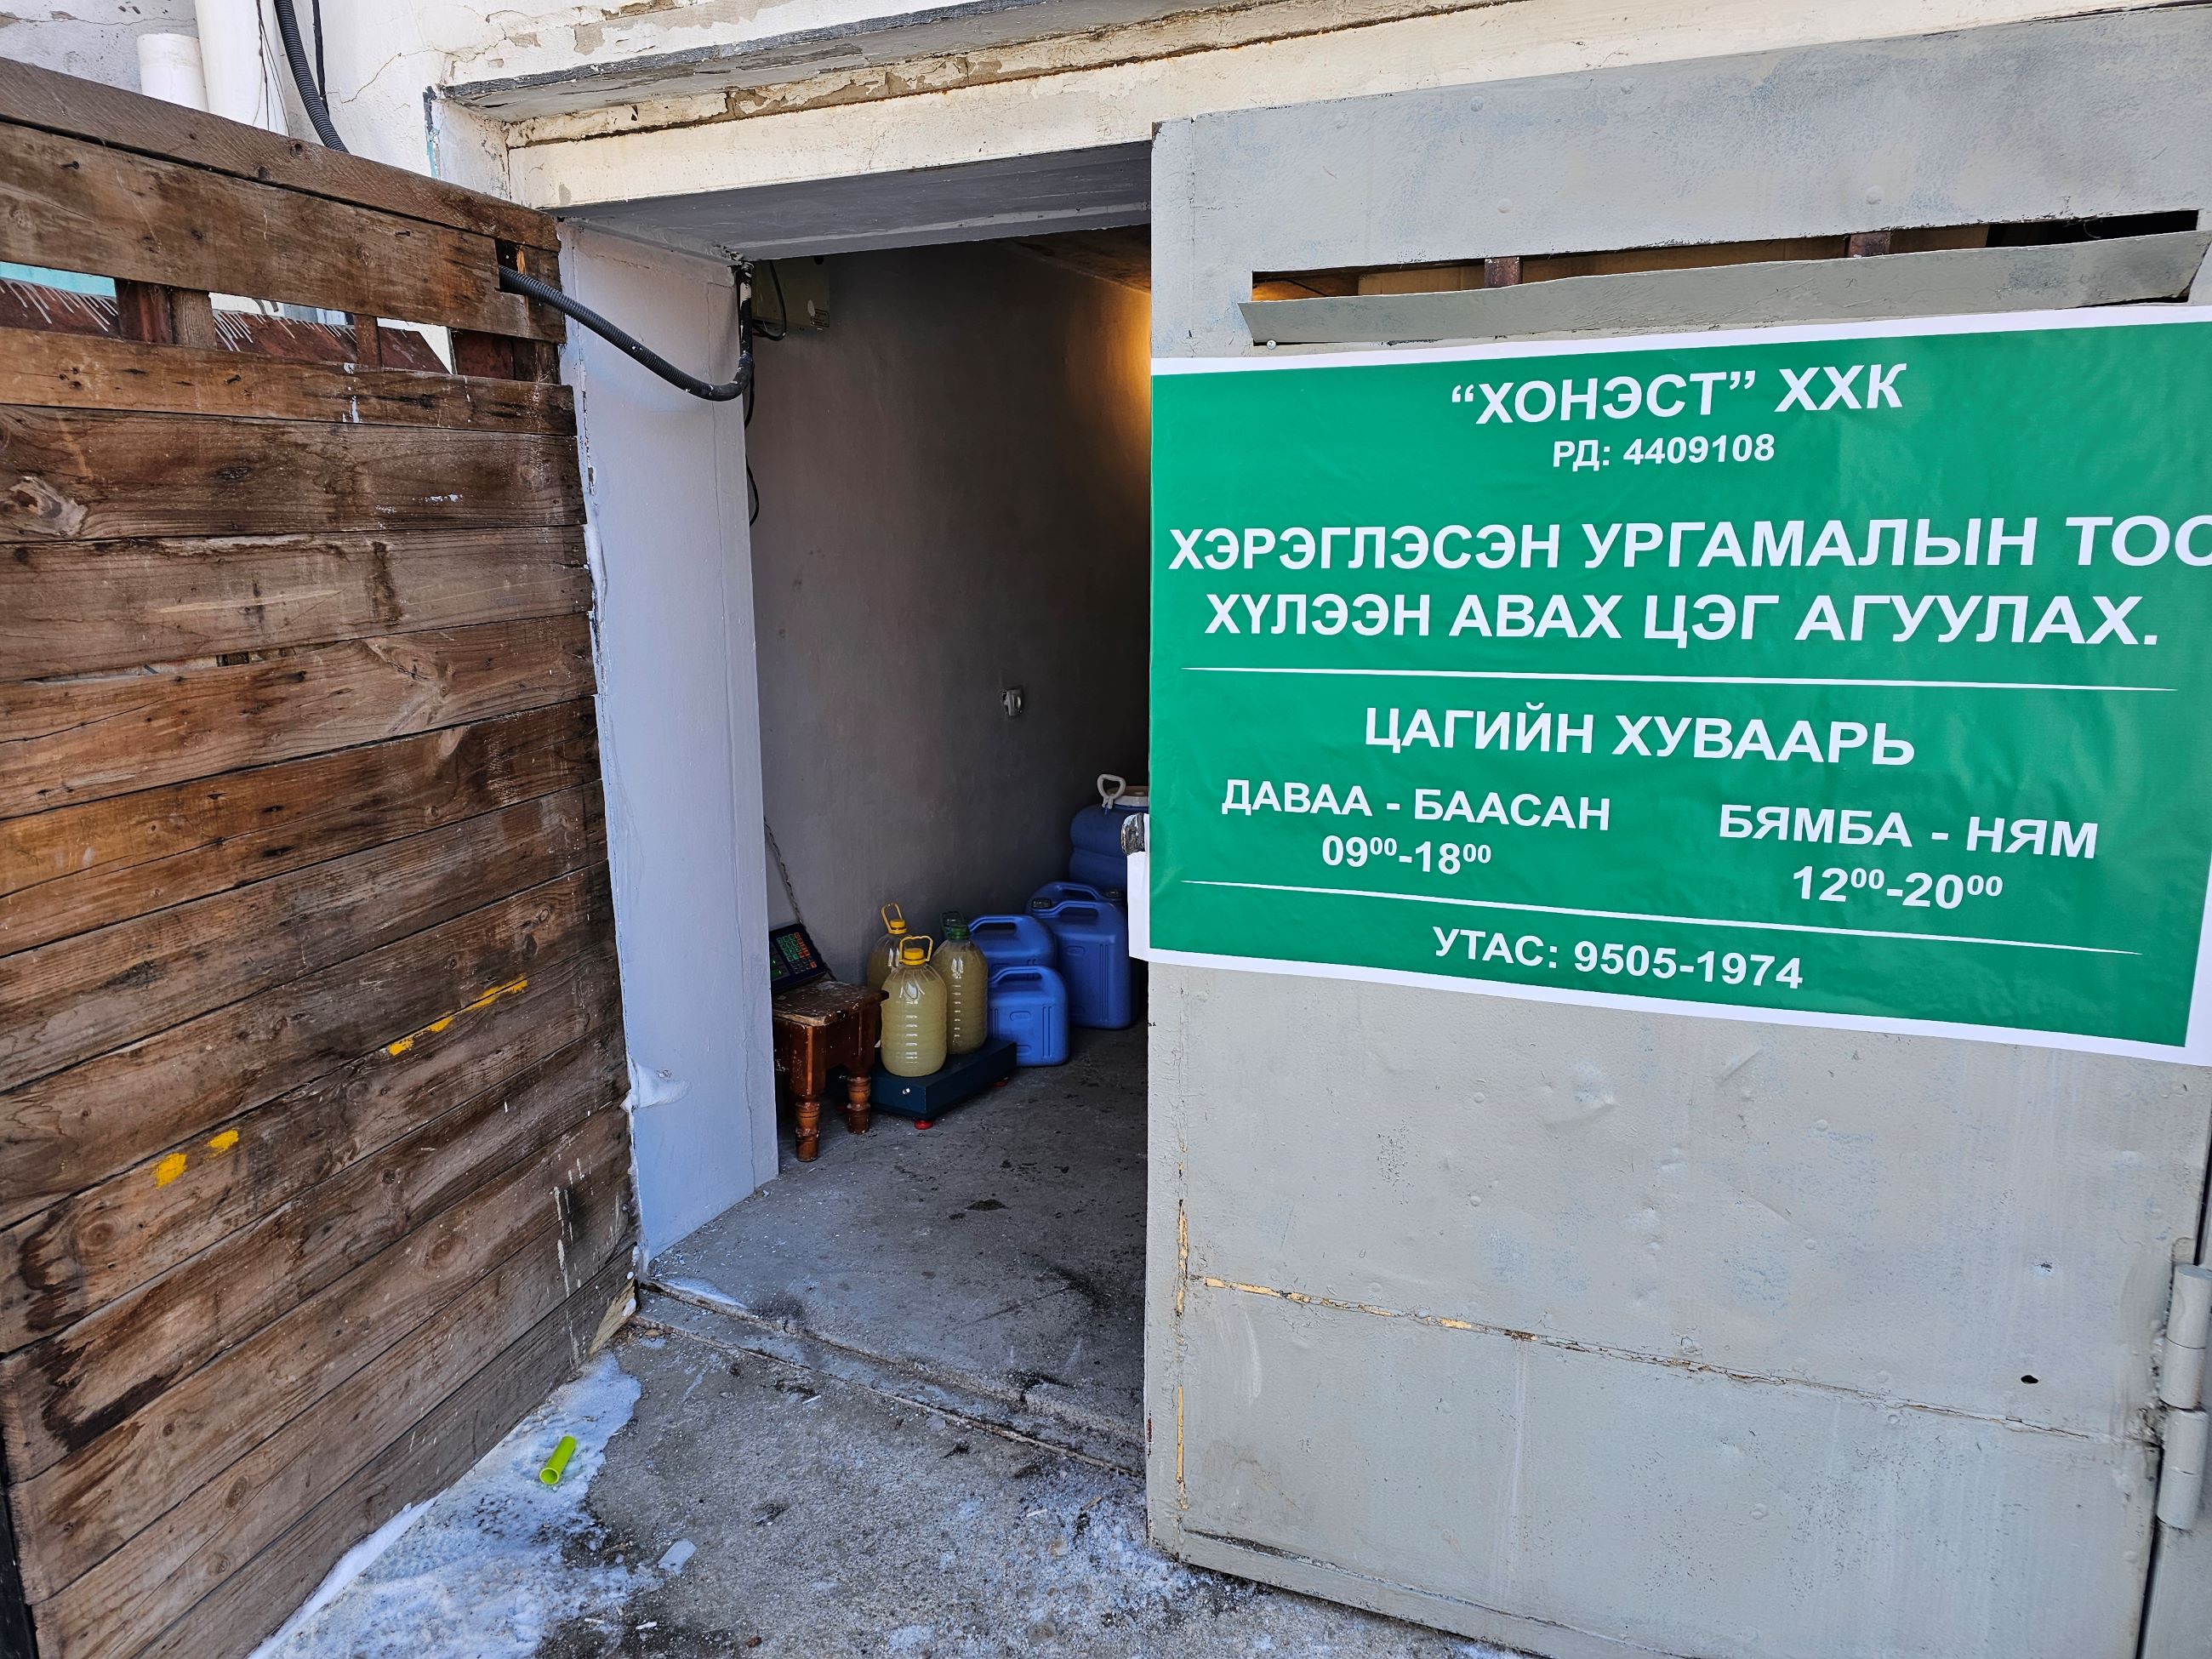 The first collection point for used cooking oil in Mongolia